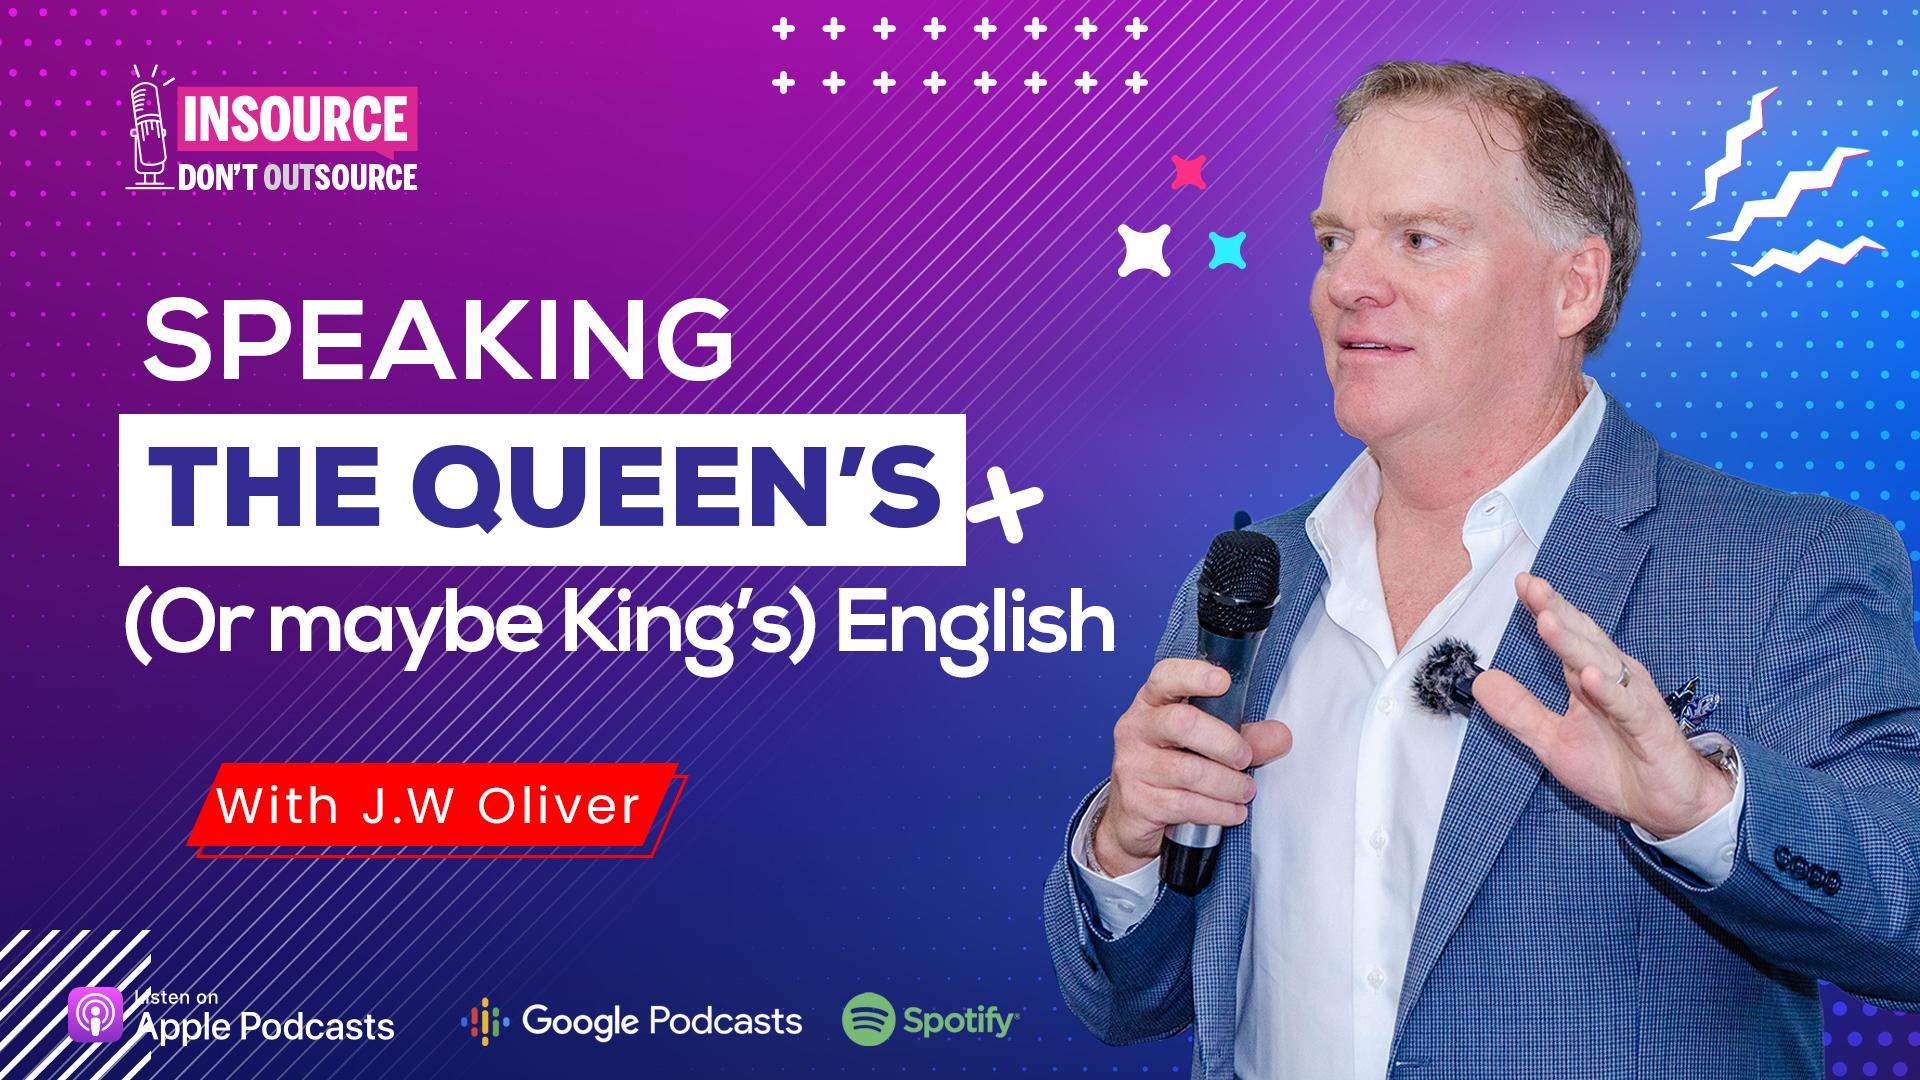 Episode 20 | Speaking the Queen’s or maybe King's English